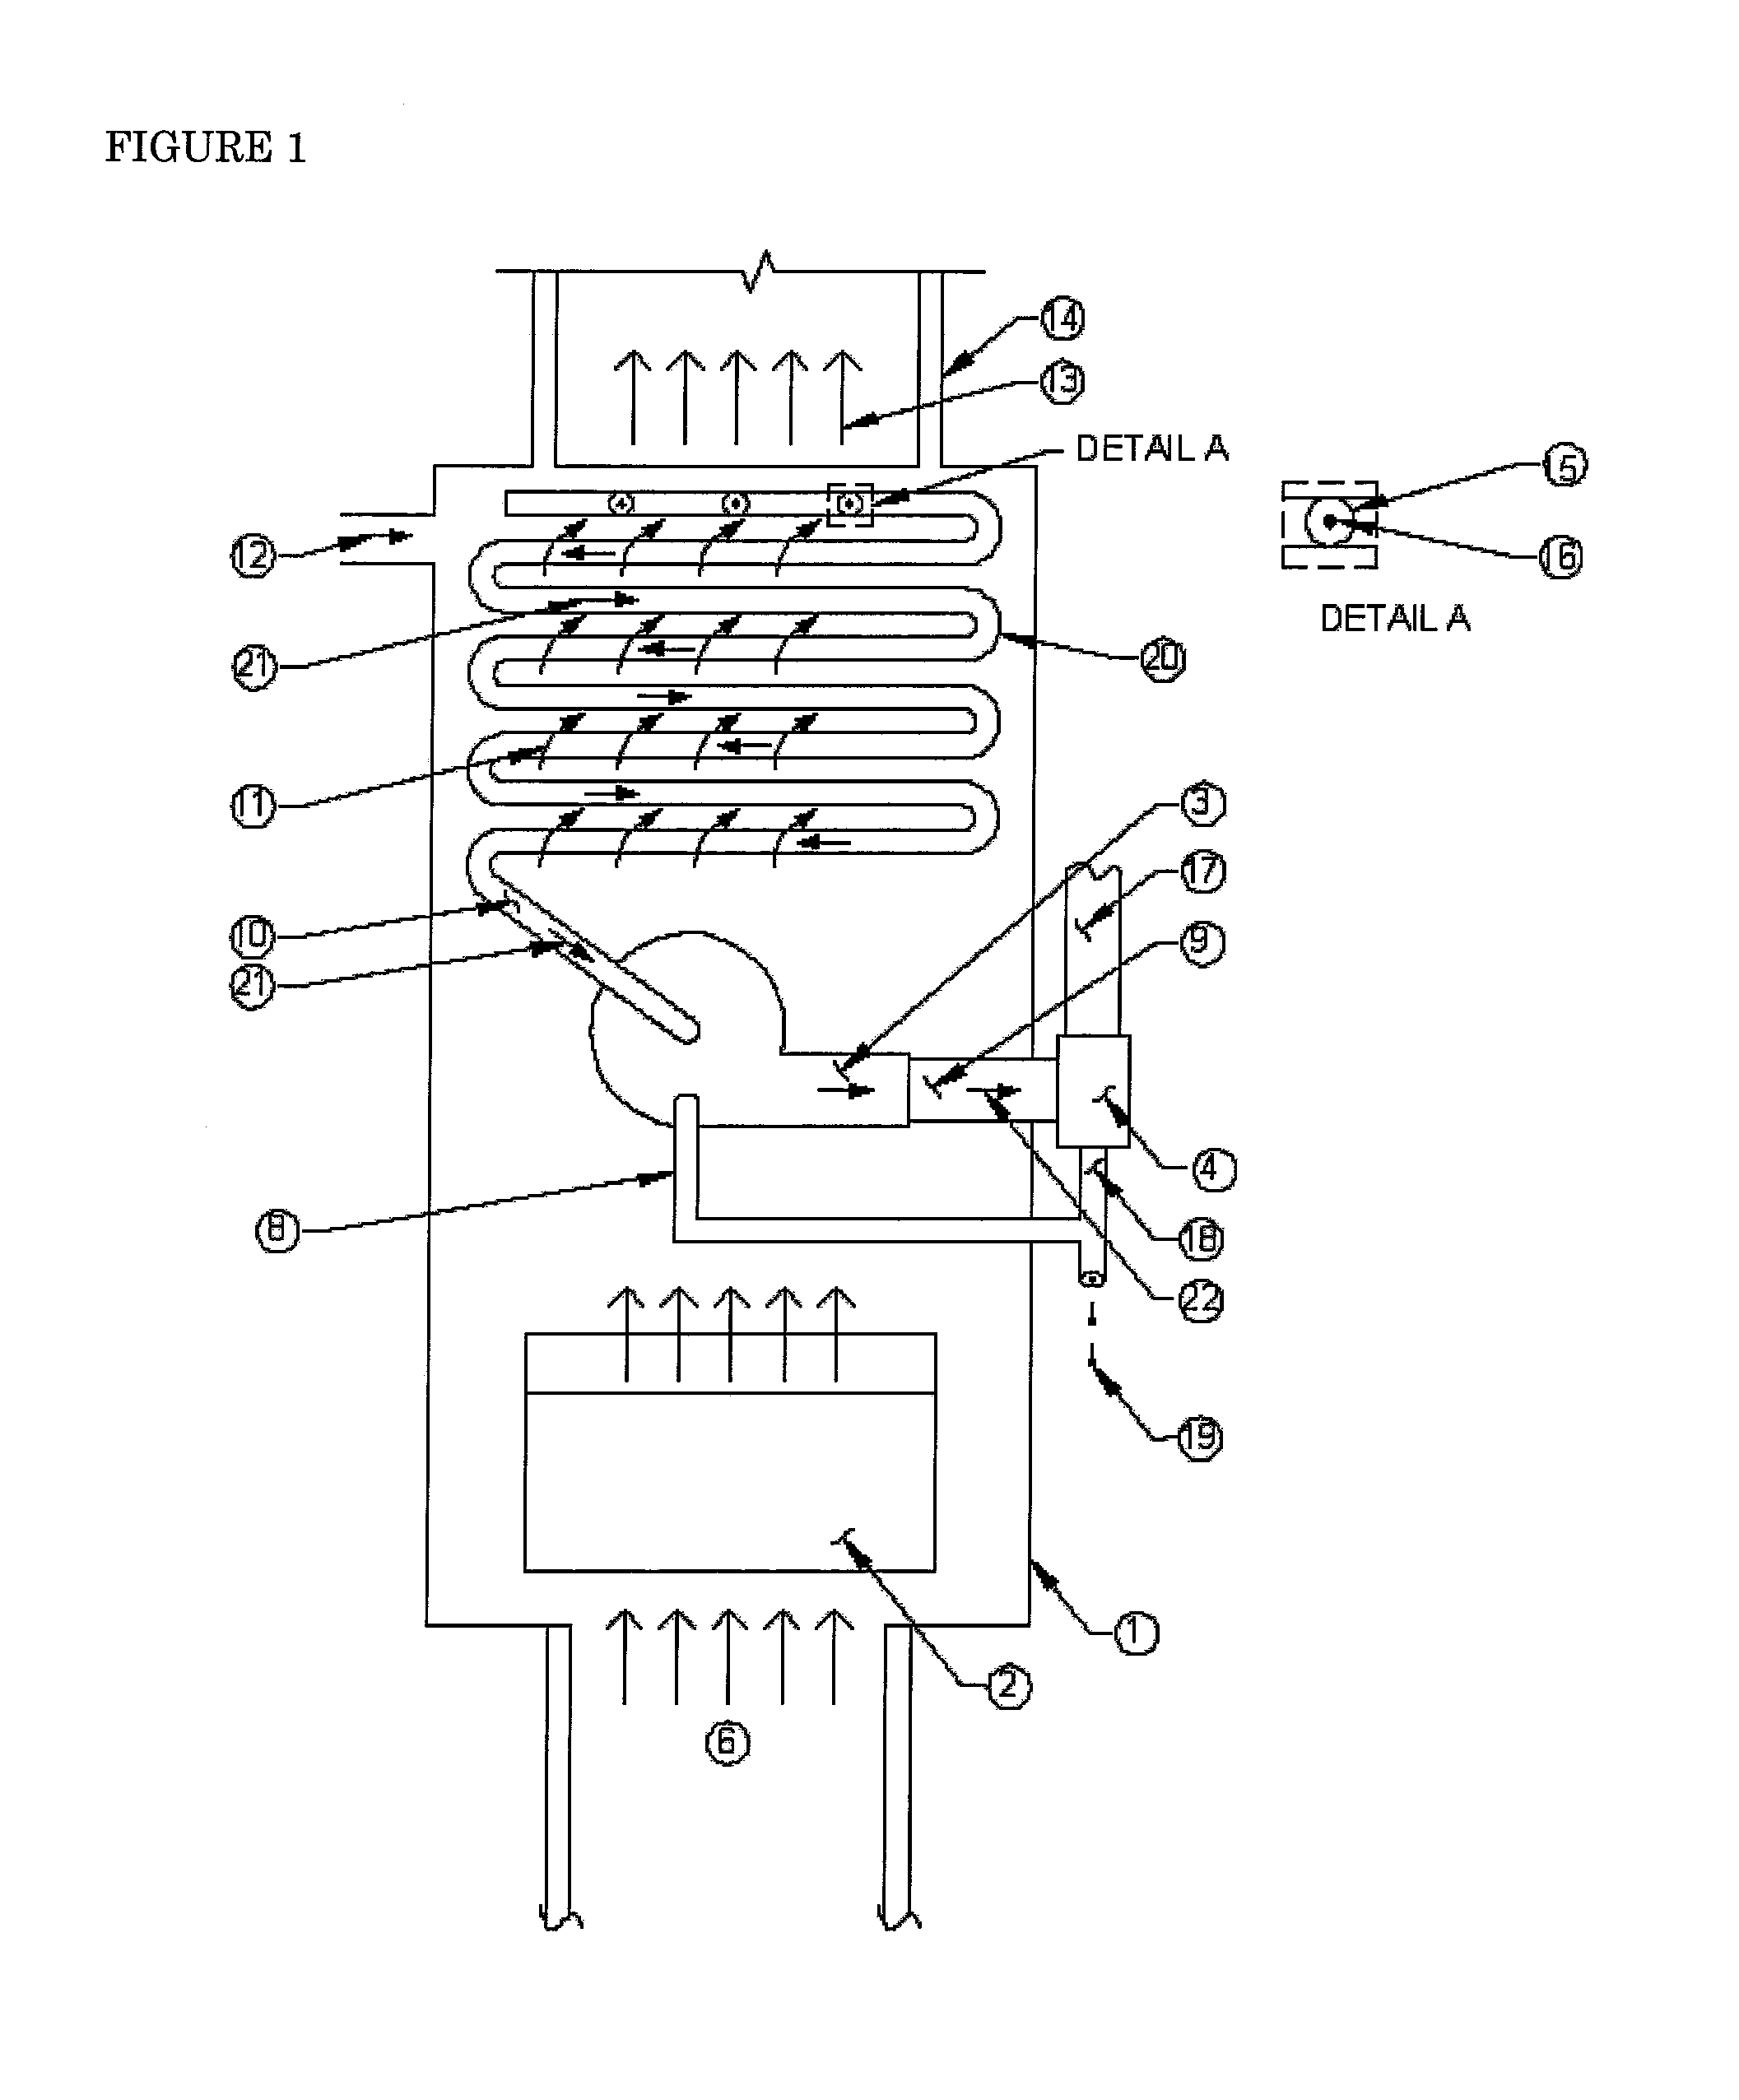 Compositions and methods for detecting leaks in HVAC/R systems